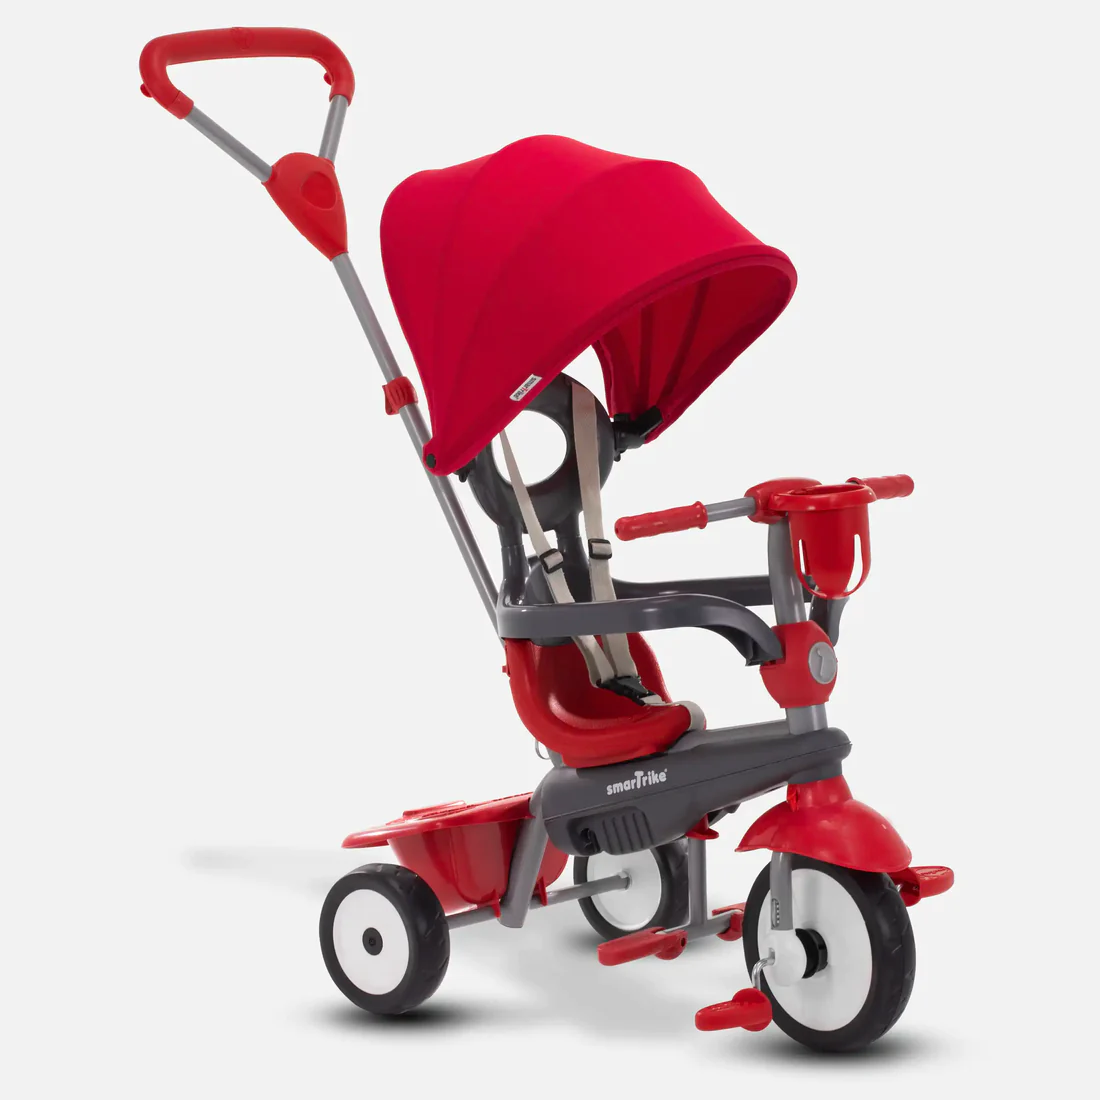 4-in-1 Breeze Plus Toddler Tricycle